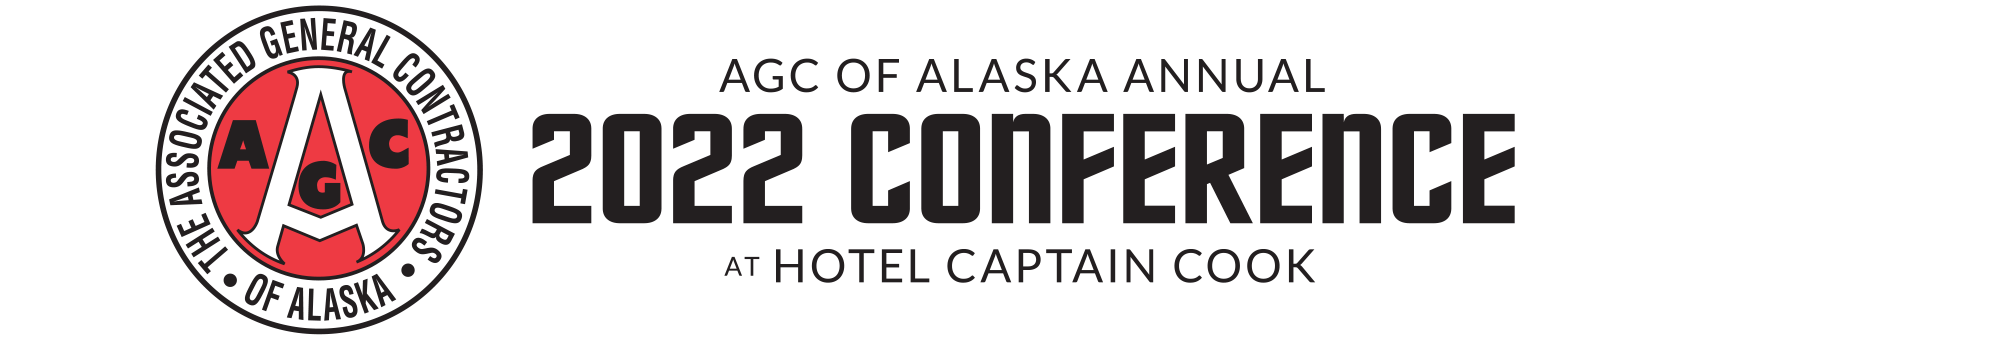 AGC Alaska Annual 2022 Conference at Hotel Captain Cook